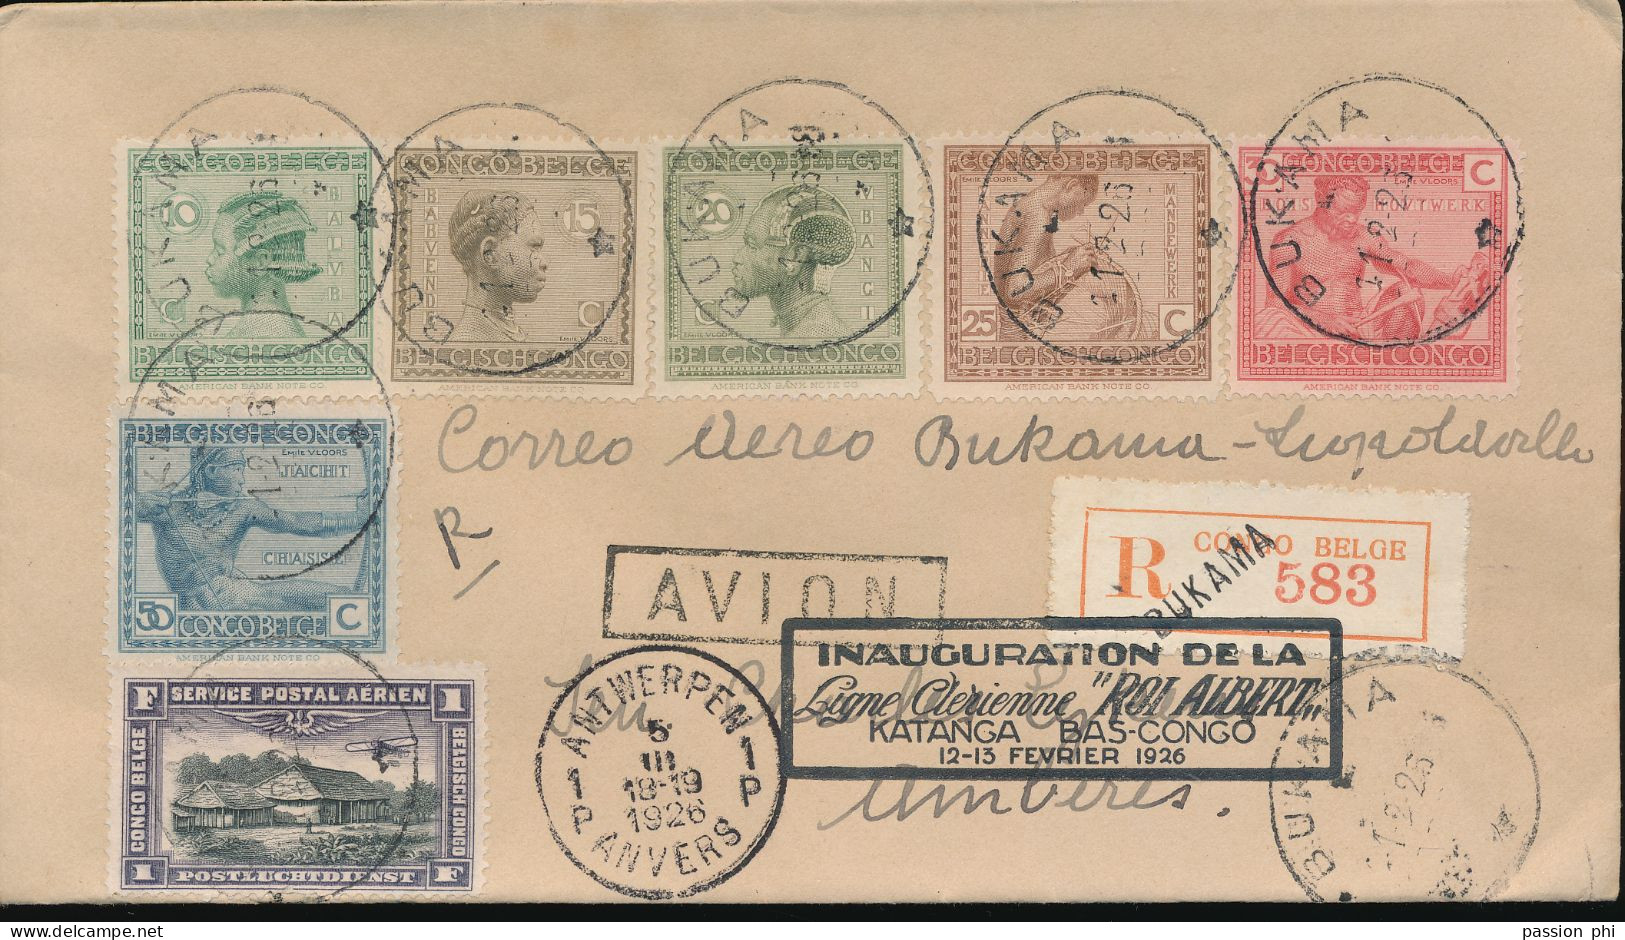 BELGIAN CONGO AIR COVER 2e LARA REGISTERED COVER FROM BUKANIA 11.02.26 TO ANTWERPEN - Covers & Documents